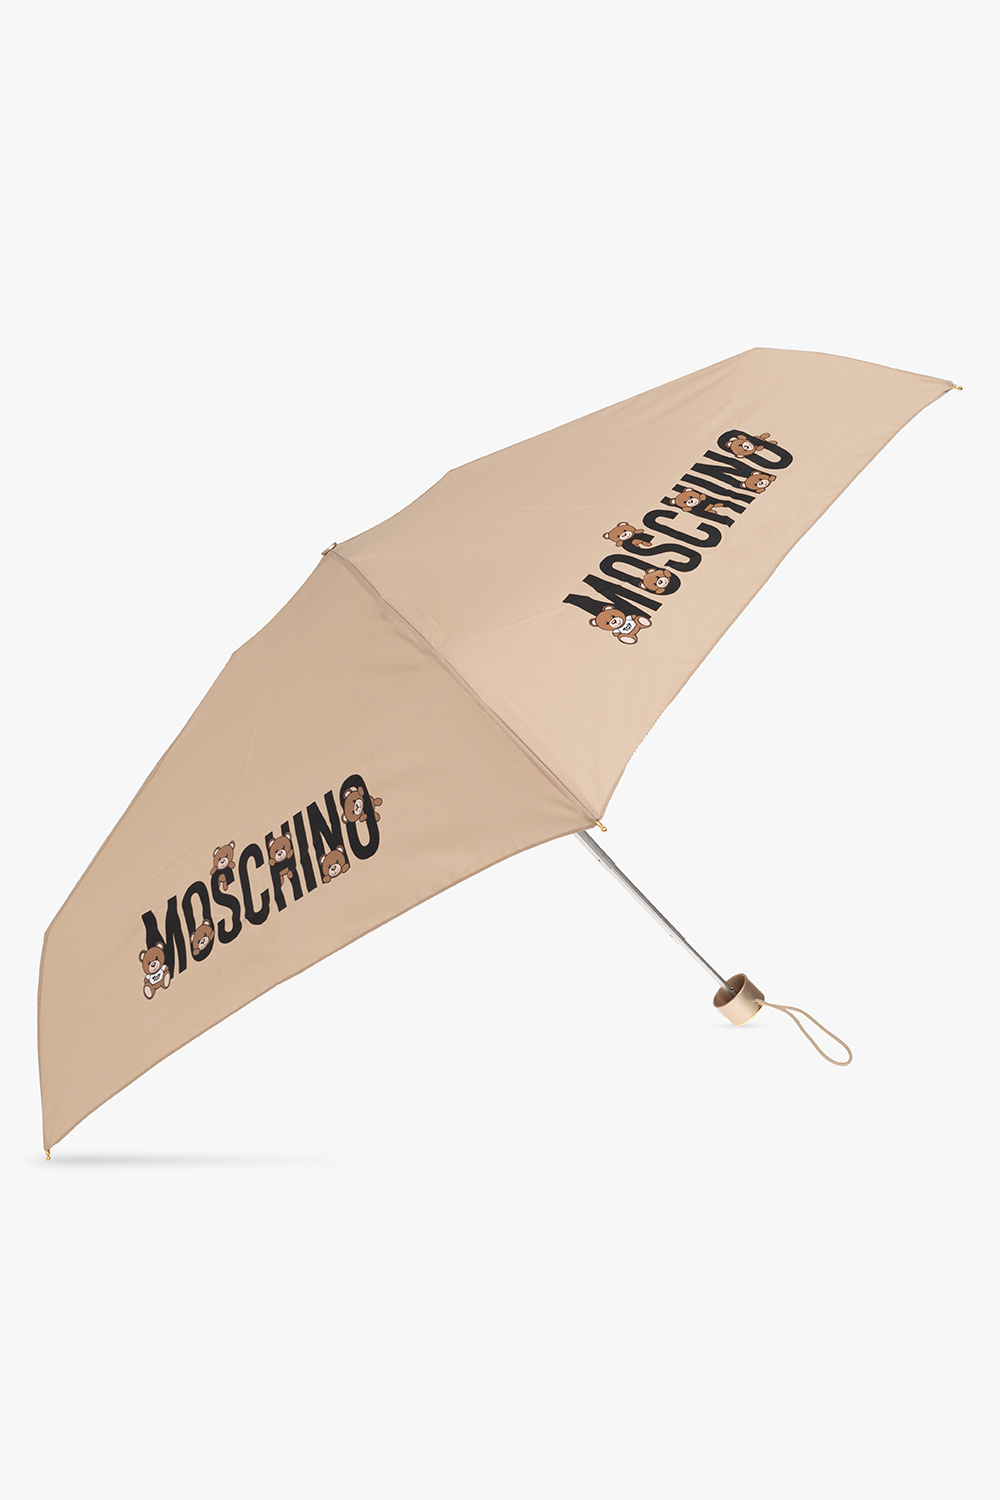 Moschino EARN THE TITLE OF THE BEST DRESSED GUEST